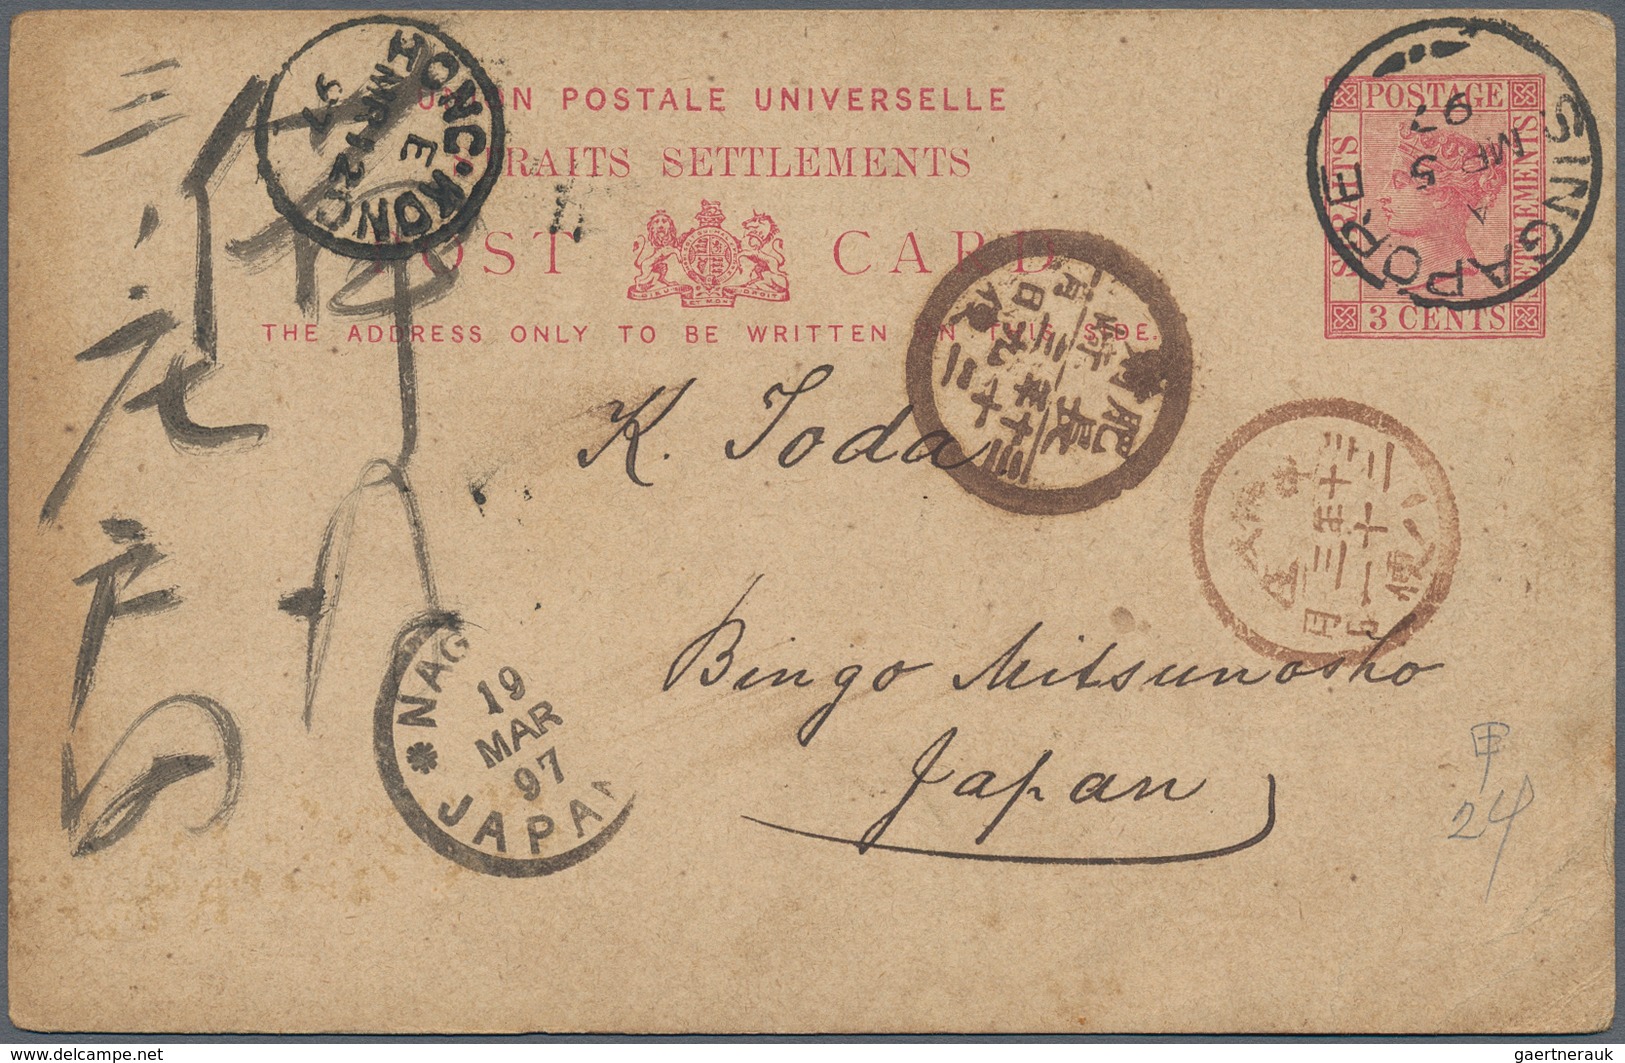 Malaiische Staaten - Straits Settlements: 1879-1940's POSTAL STATIONERY: Collection of more than 180